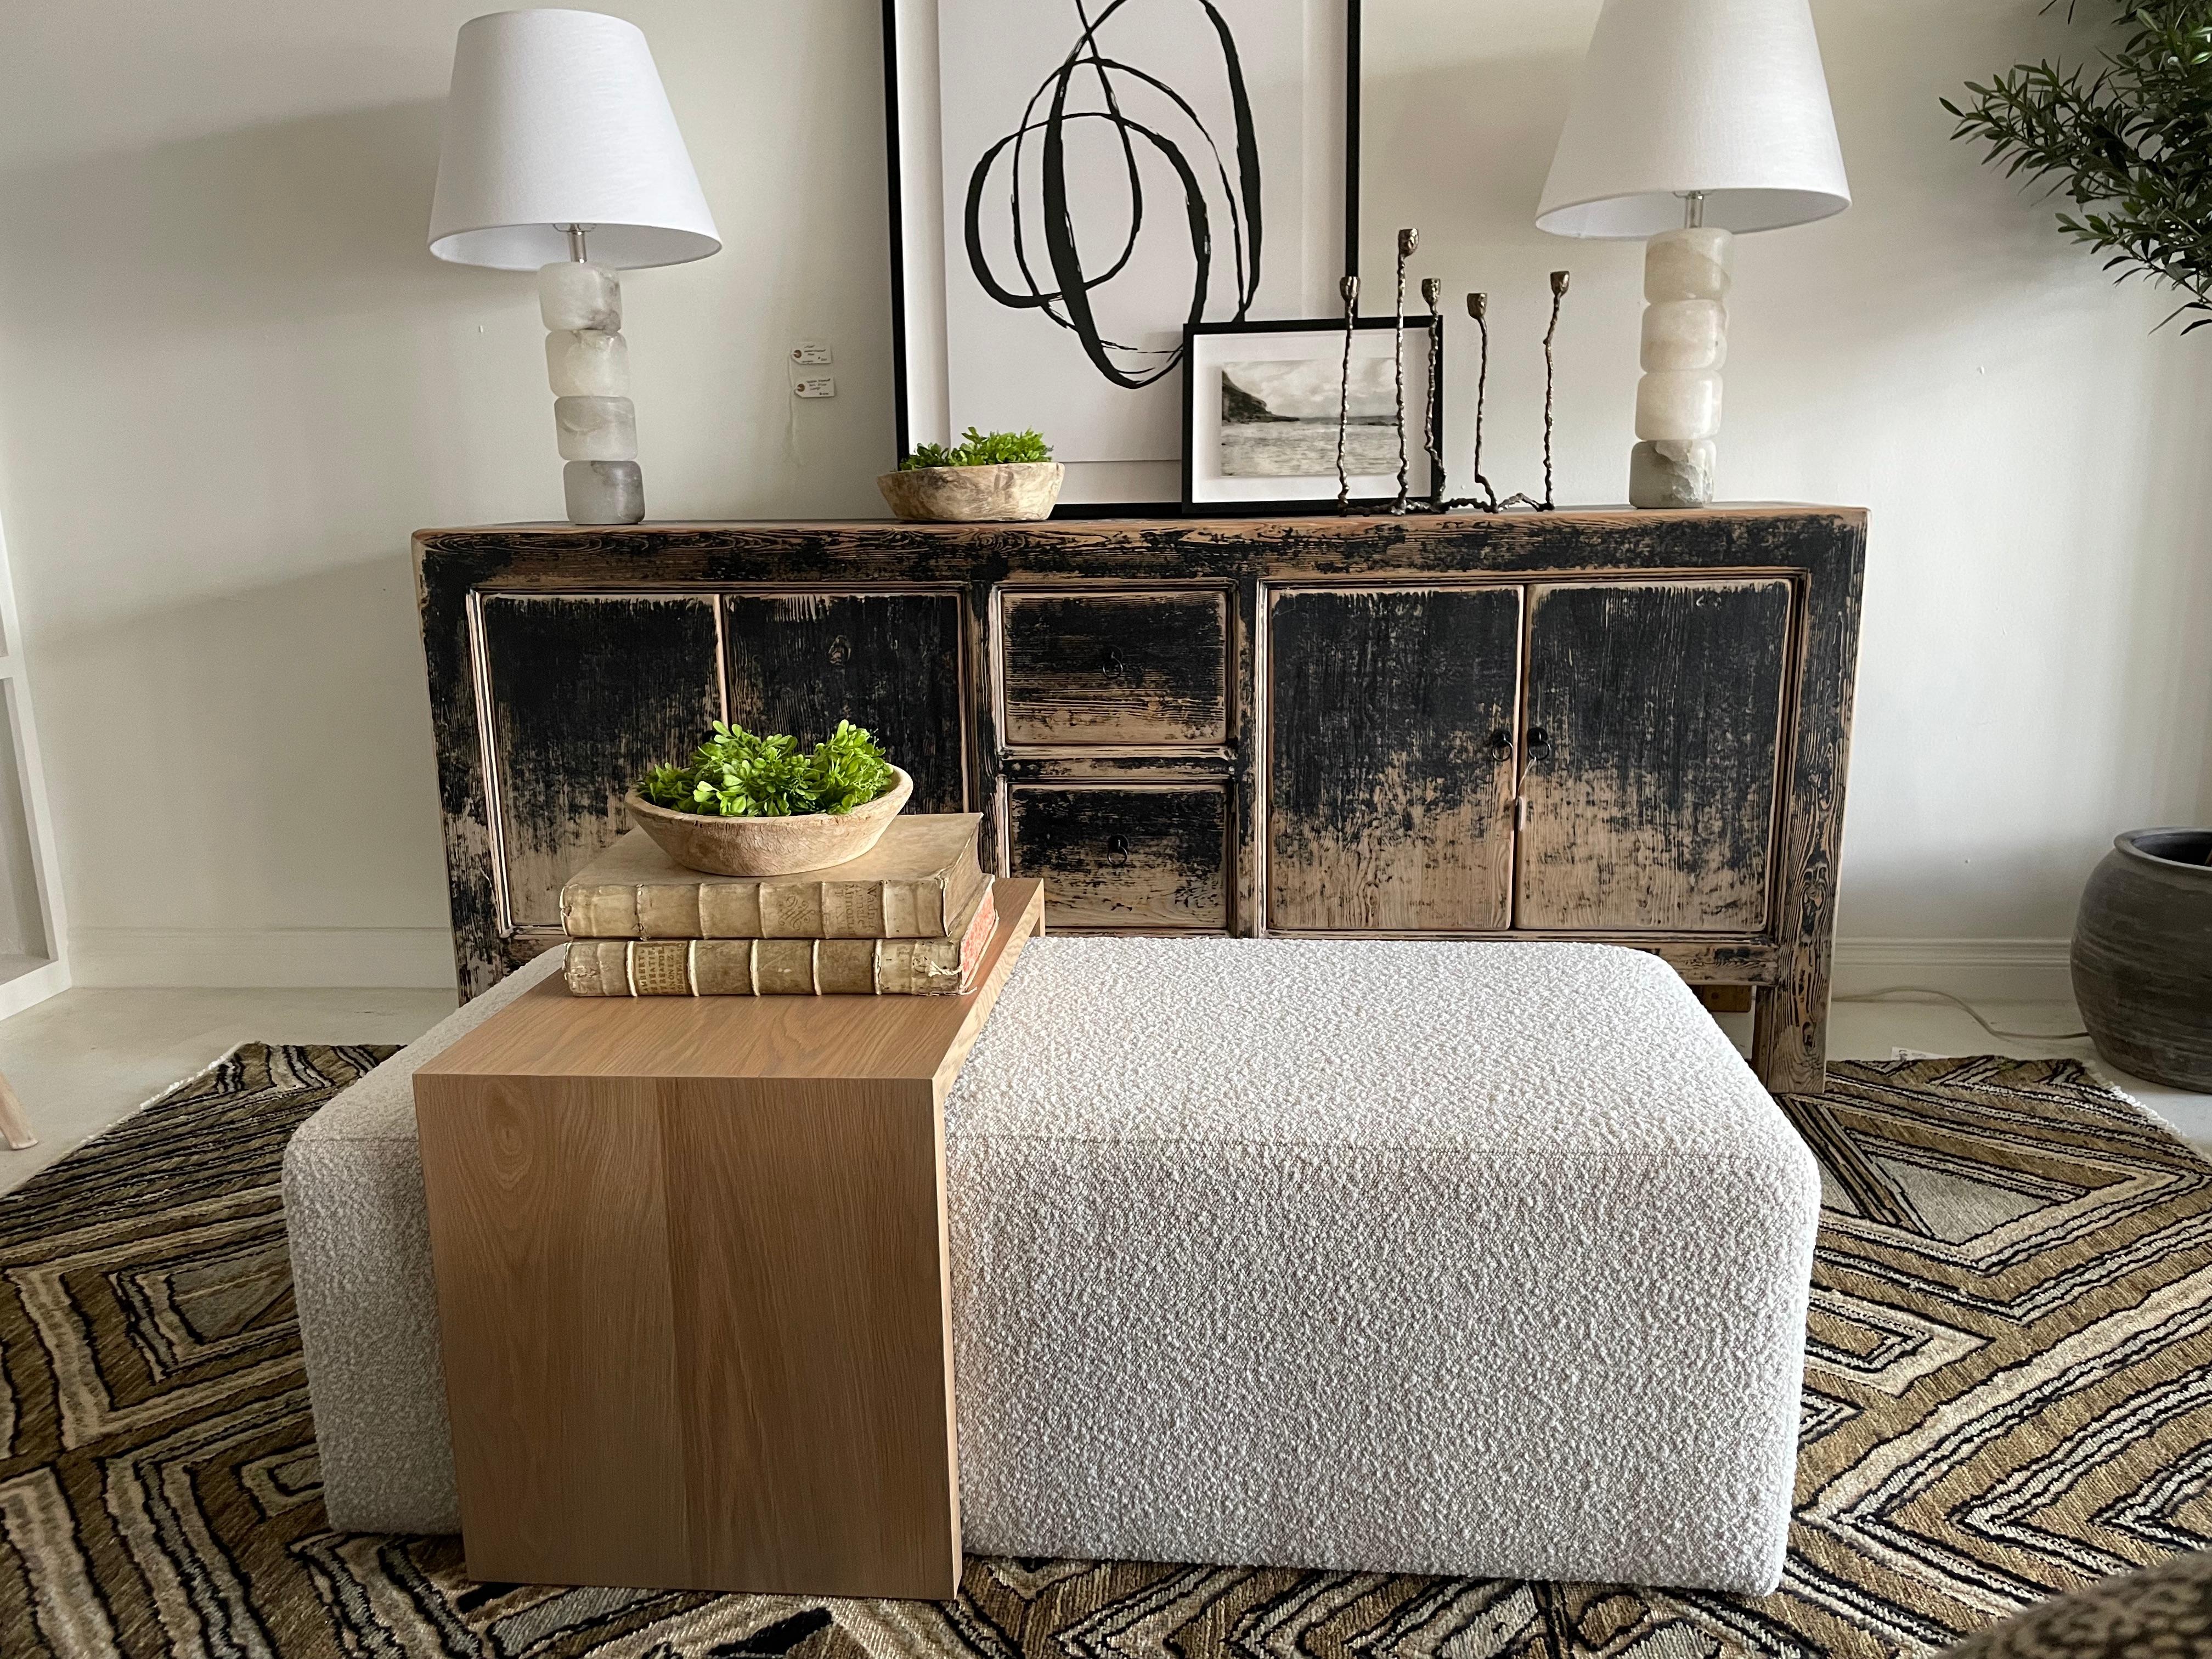 Custom ottoman cocktail table in creamy white boucle fabric. Firmer foam holds its structure when using as a bench for seating.
White Oak waterfall style table can be used and moved for versatilily.
Ottoman: 54